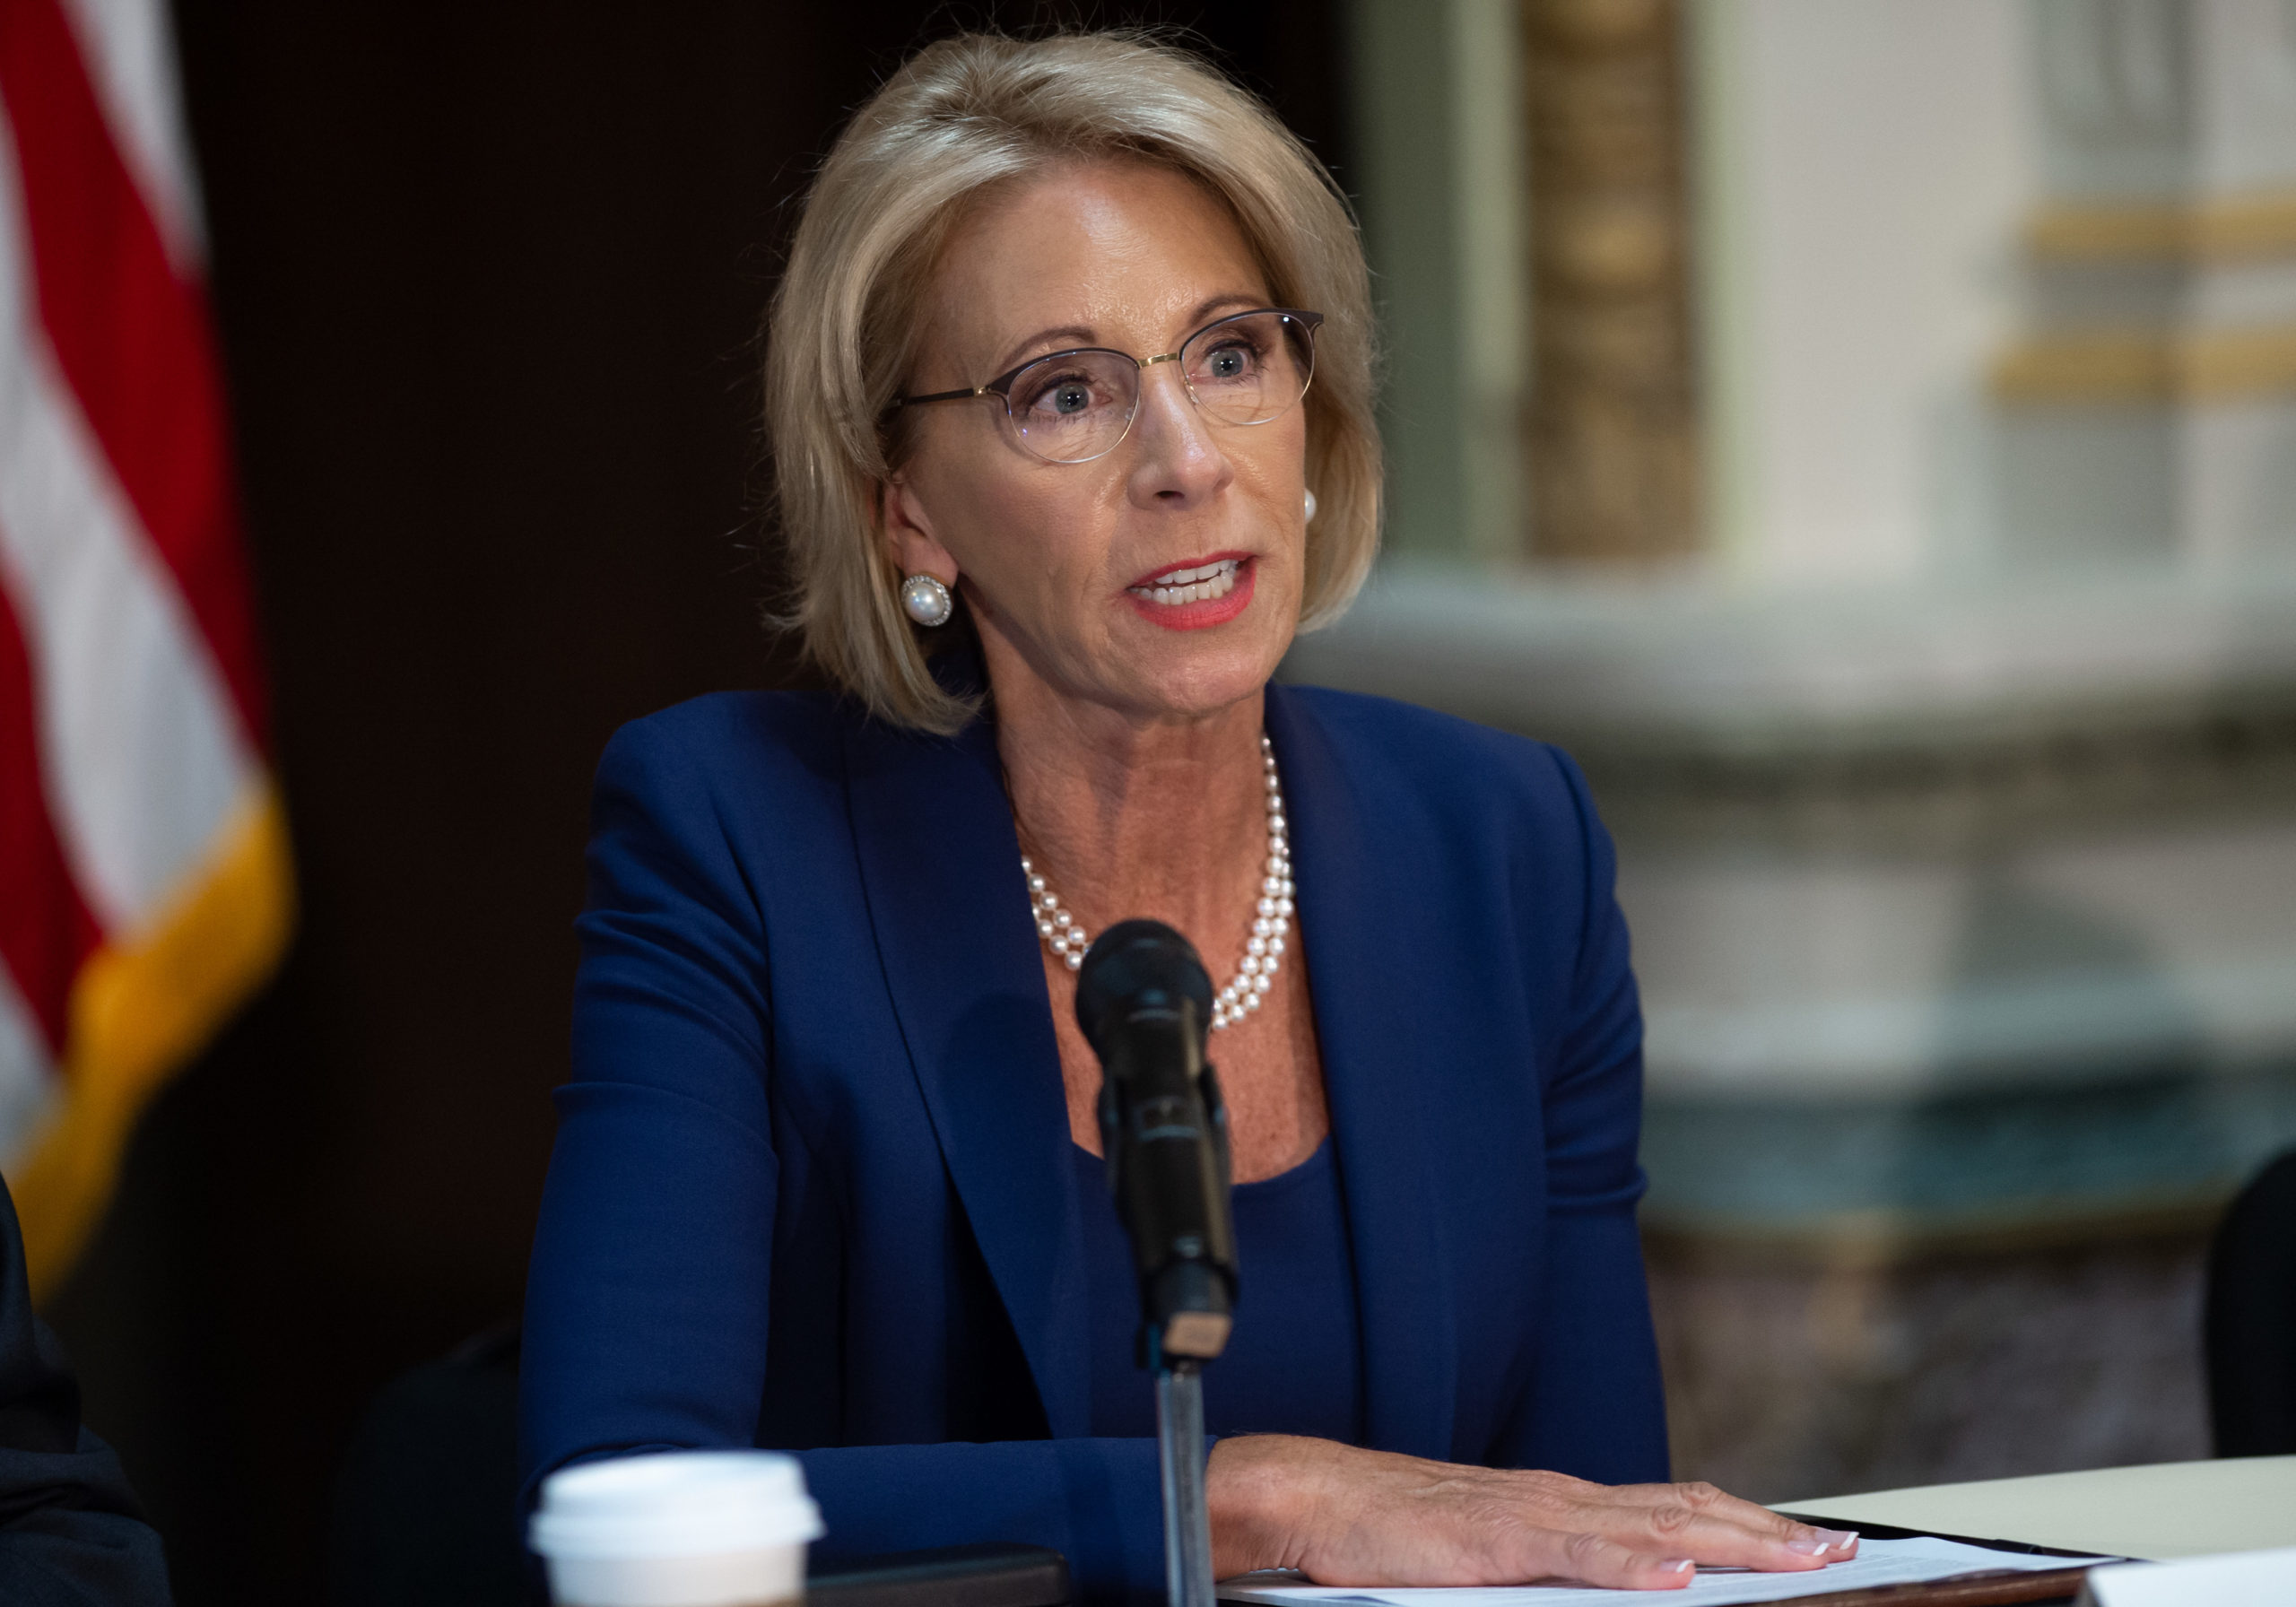 US Secretary of Education Betsy DeVos speaks during the fifth meeting of the Federal Commission on School Safety, focusing on the best practices for school building security, active shooter training for schools and practitioner experience with school-based threat assessment, in the Eisenhower Executive Office Building, adjacent to the White House in Washington, DC, August 16, 2018. (Photo by SAUL LOEB / AFP) (Photo credit should read SAUL LOEB/AFP via Getty Images)